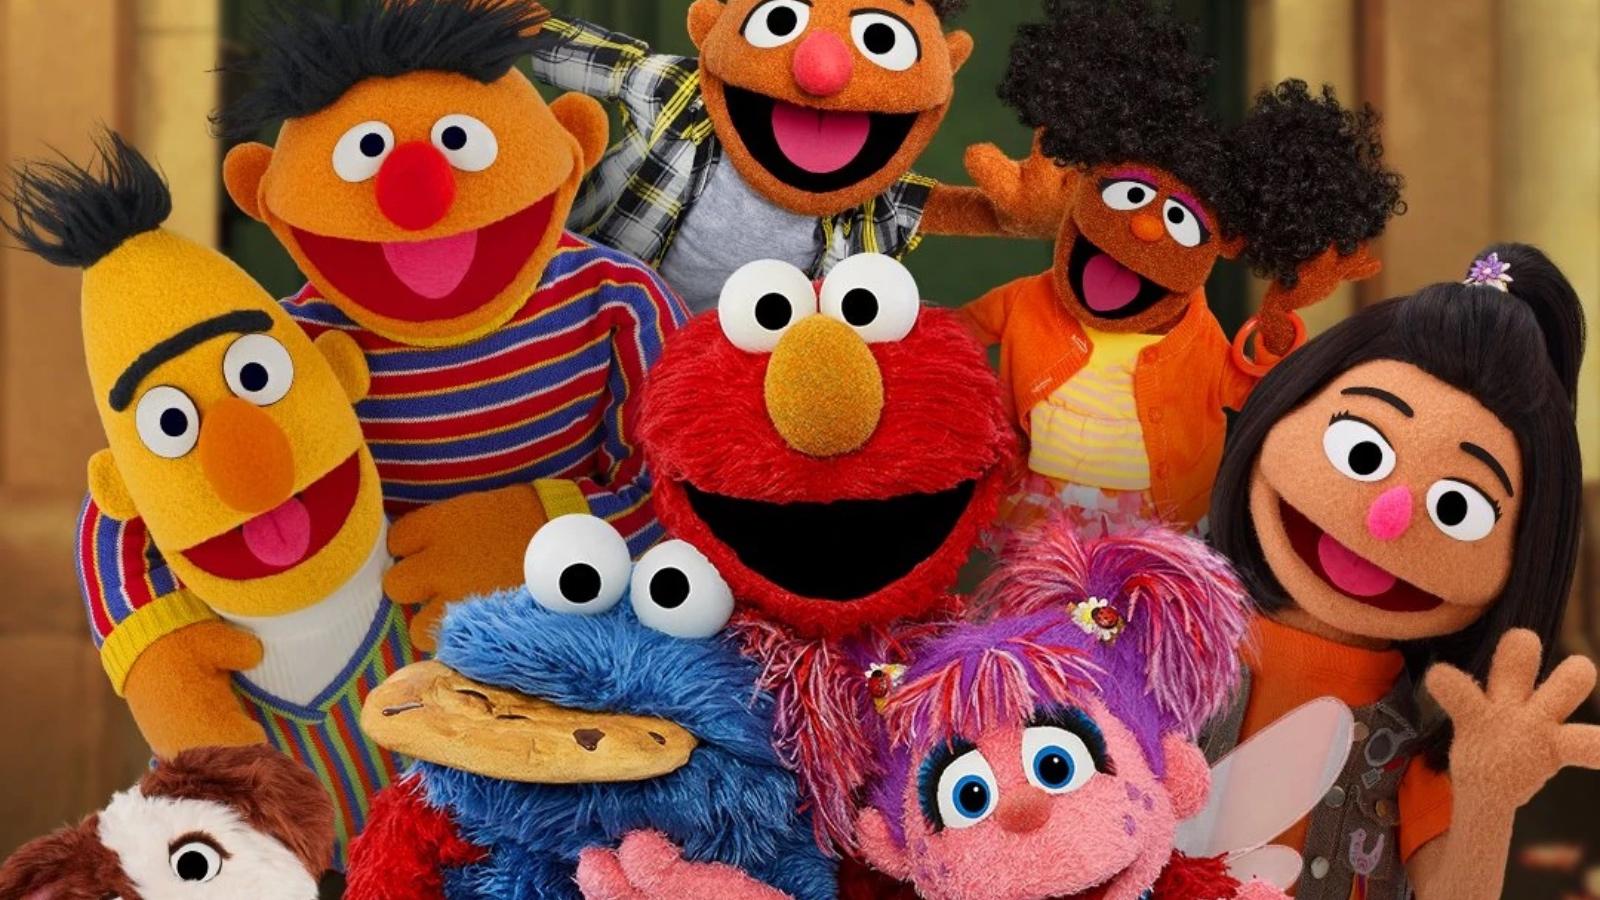 Elmo, Cookie Monster, and the characters of Sesame Street